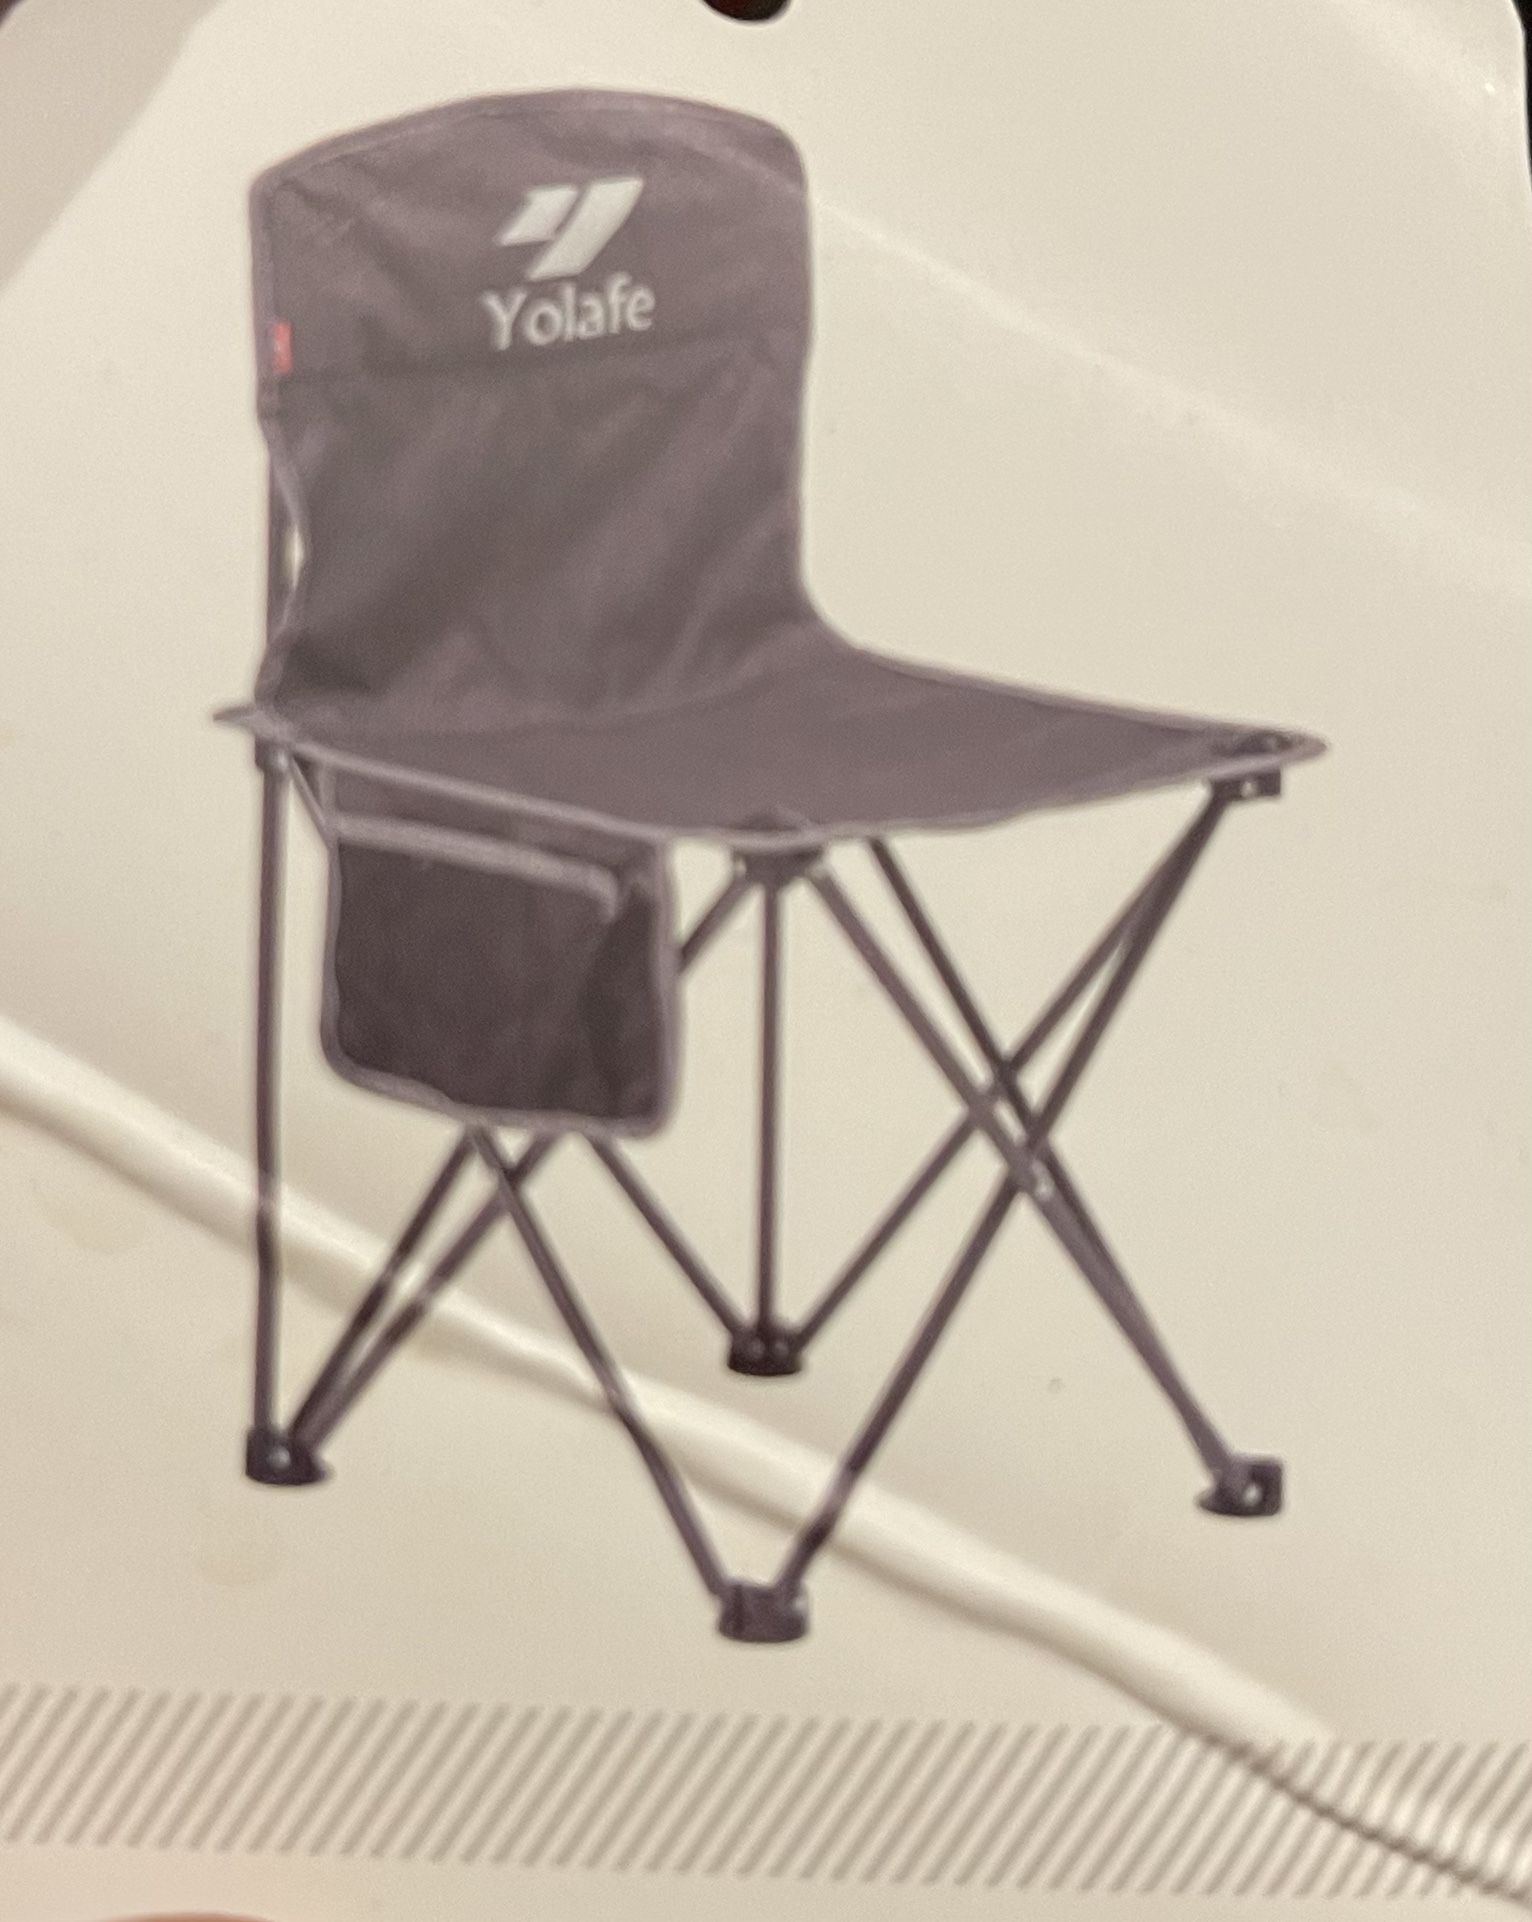 Yolafe Camping Chair